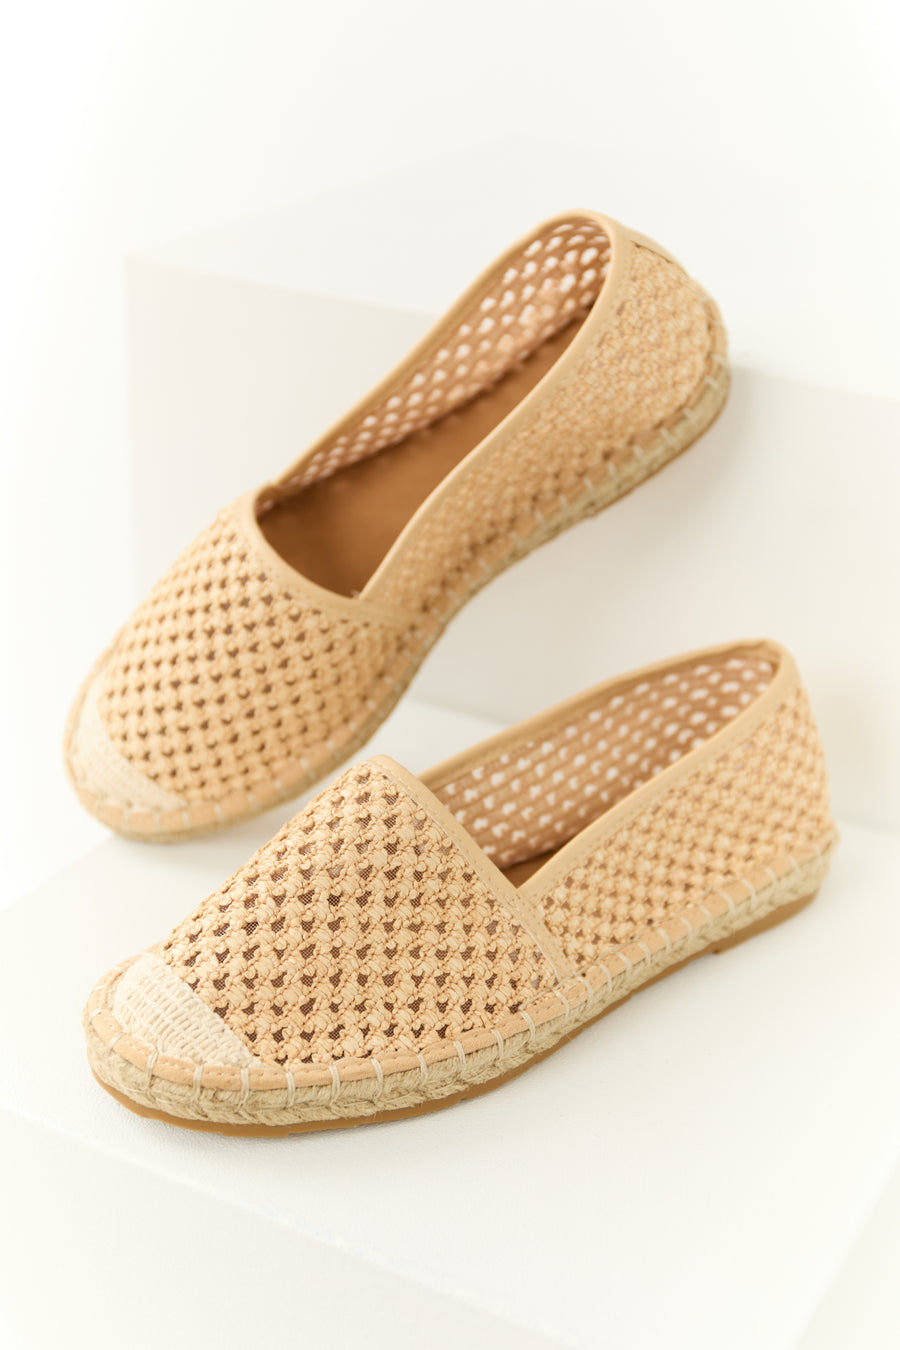 Peach Woven Rounded Toe Slip On Espadrilles